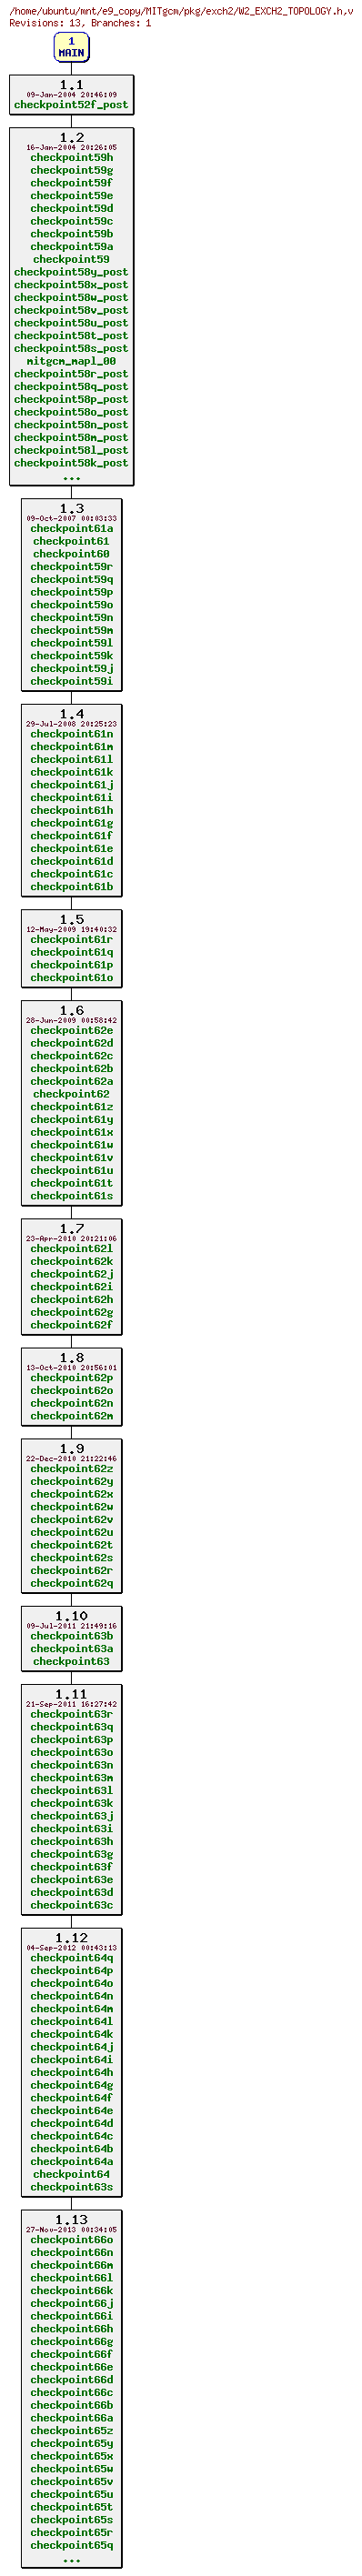 Revisions of MITgcm/pkg/exch2/W2_EXCH2_TOPOLOGY.h